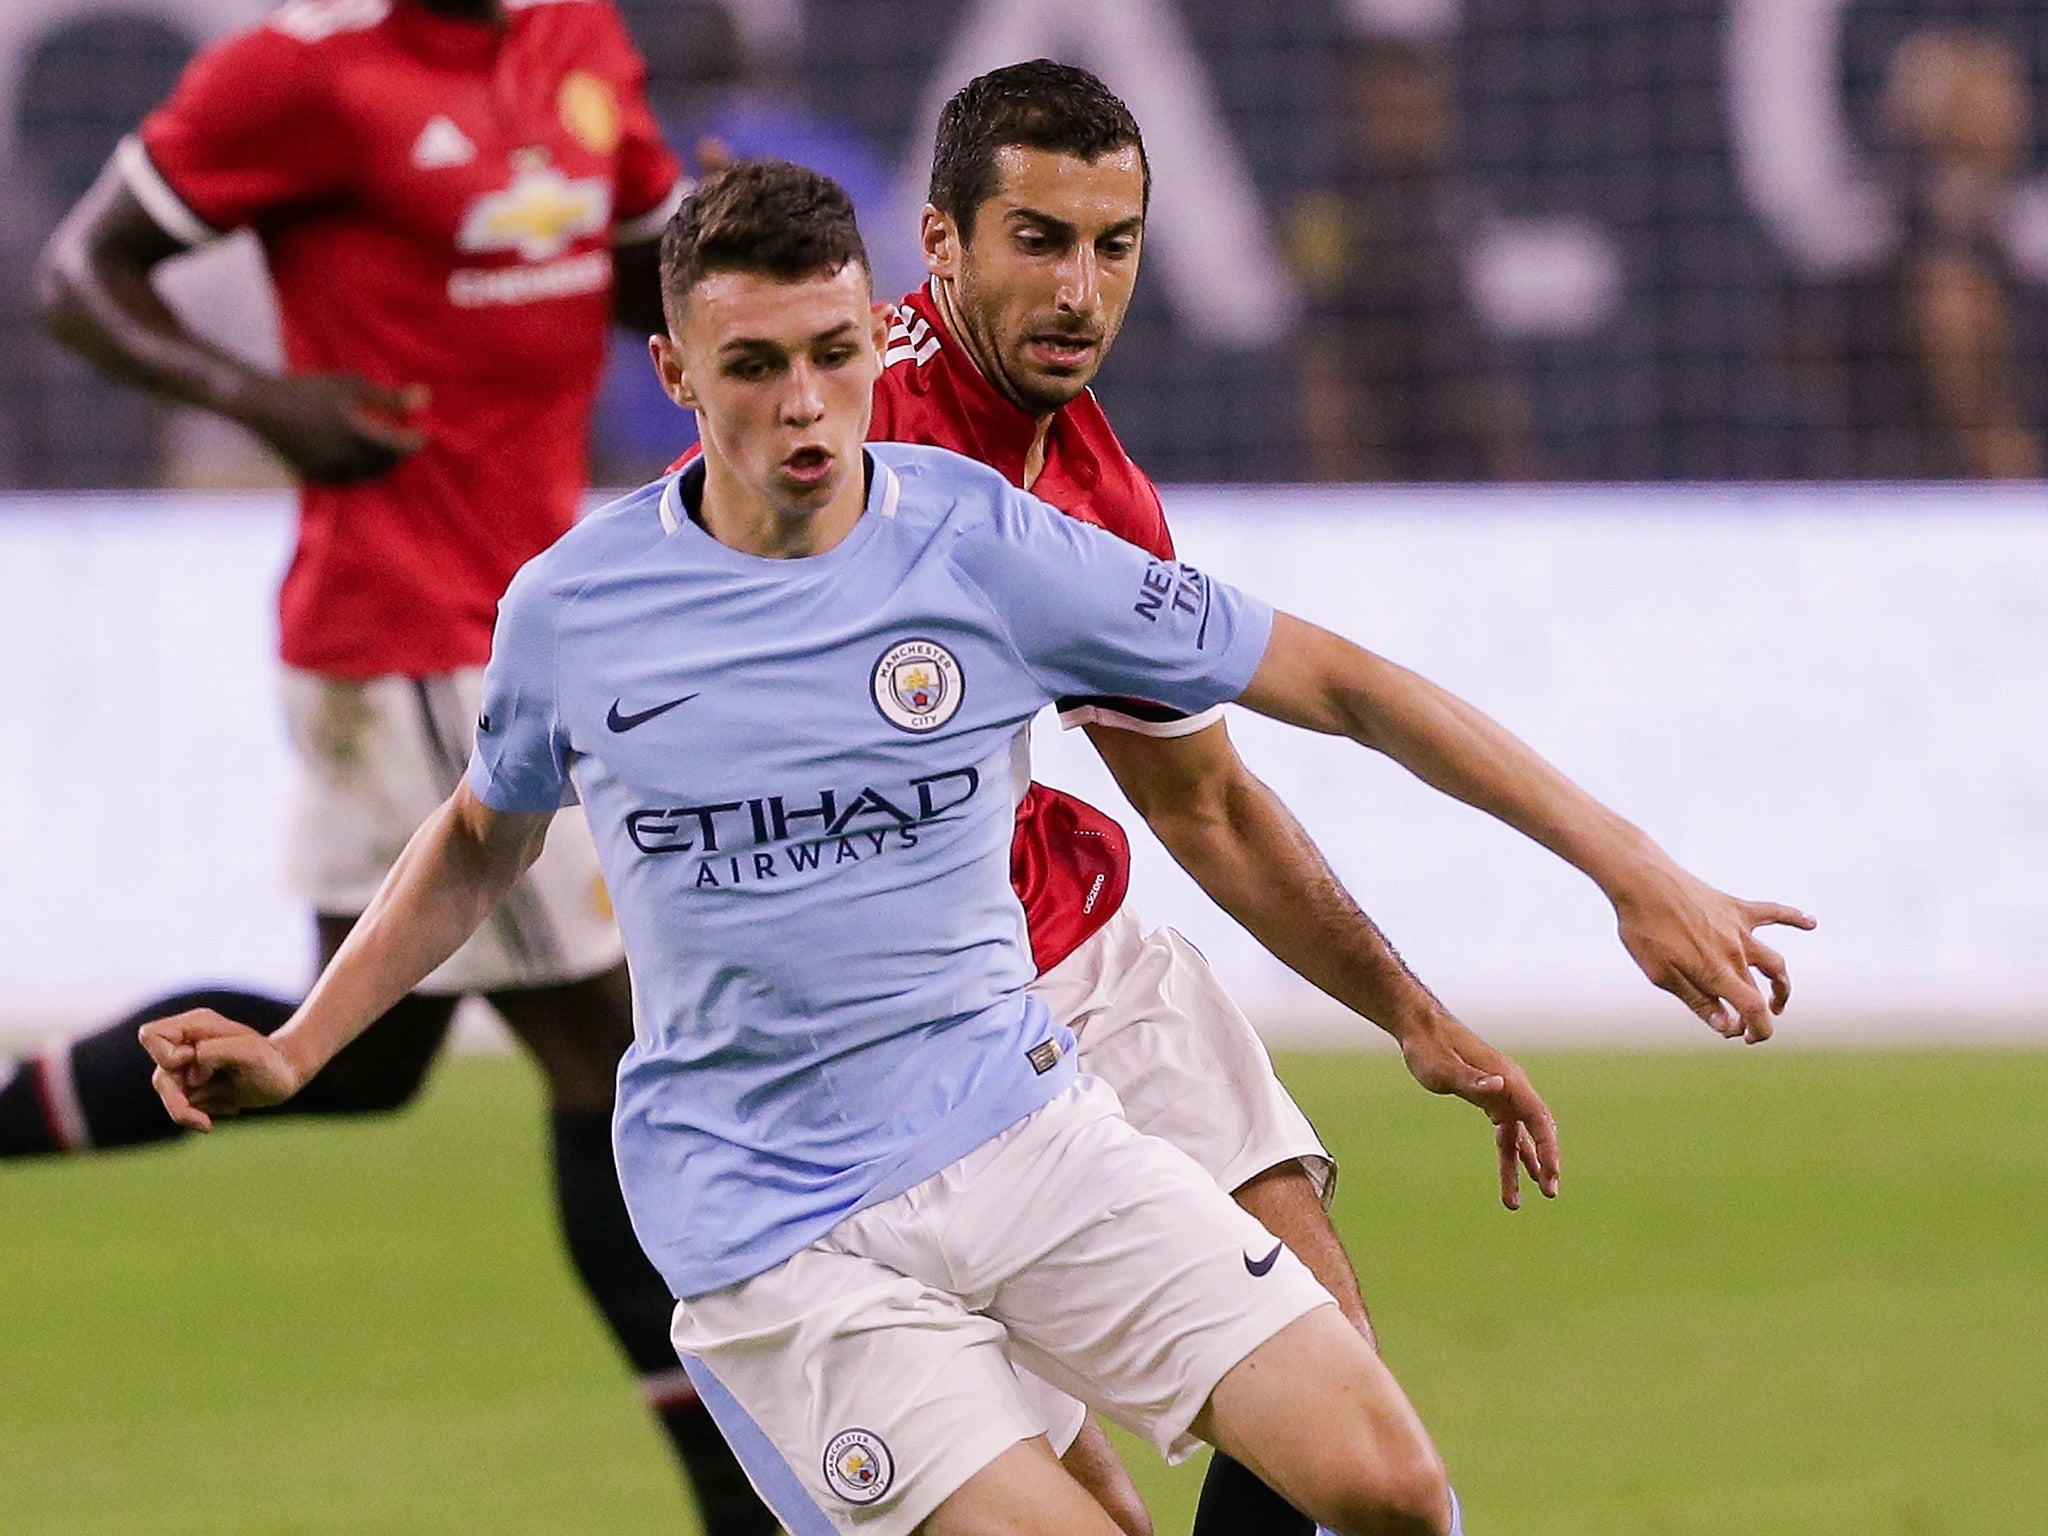 17-year-old Phil Foden is one of Manchester City's brightest young talents